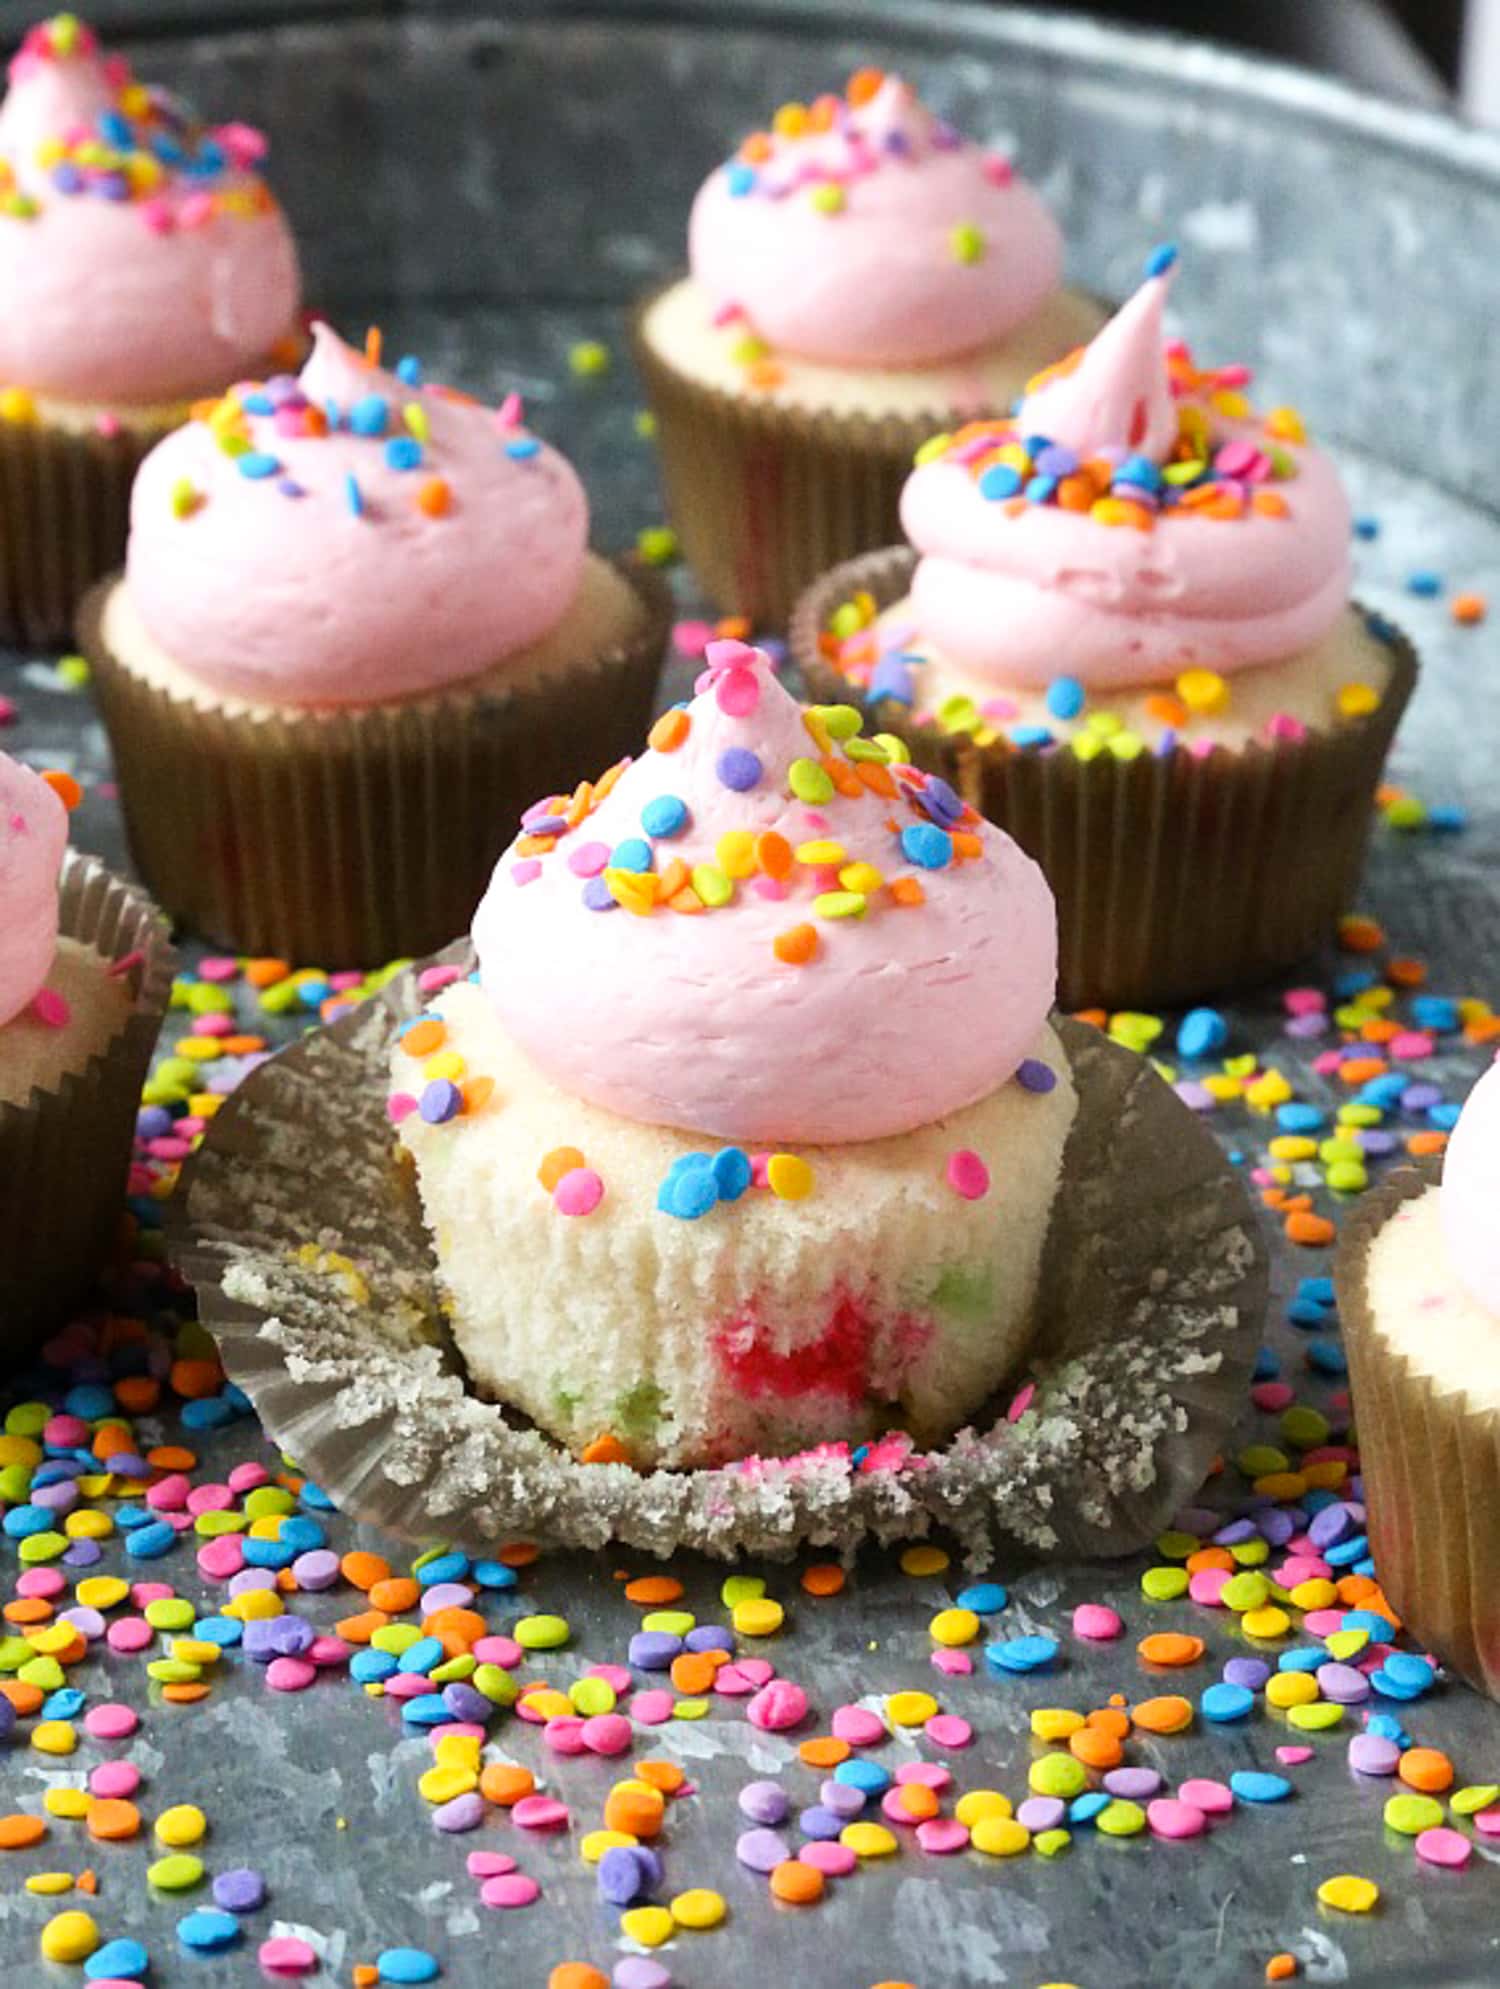 Liner peeled sprinkle cupcakes topped with pink buttercream frosting and sprinkles